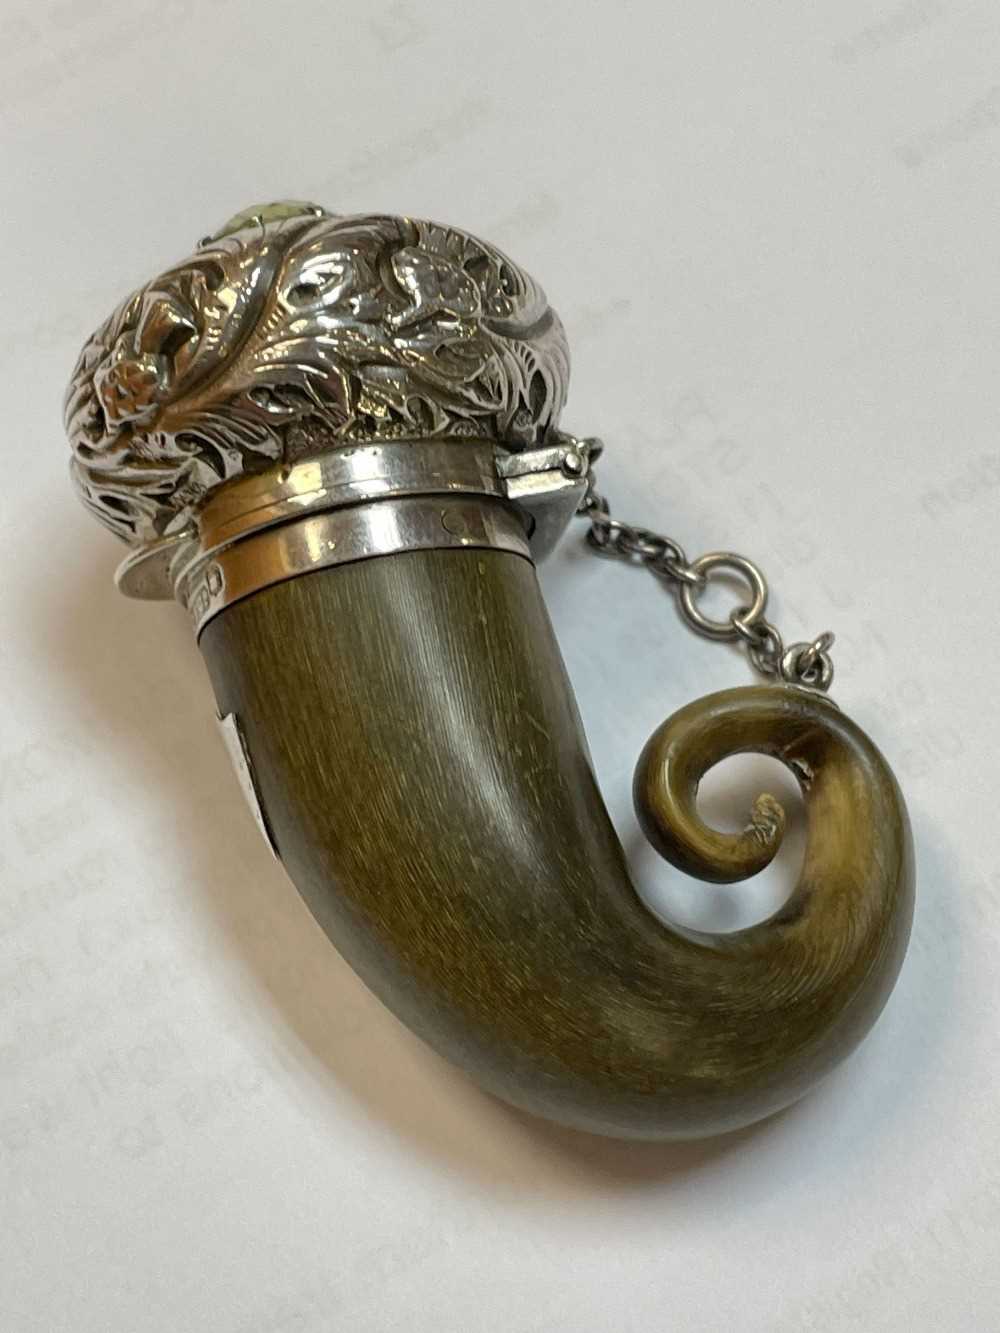 SCOTTISH HORN SNUFF MULL VINAIGRETTE with applied silver hinged cap, decorated with thistles and - Image 4 of 12